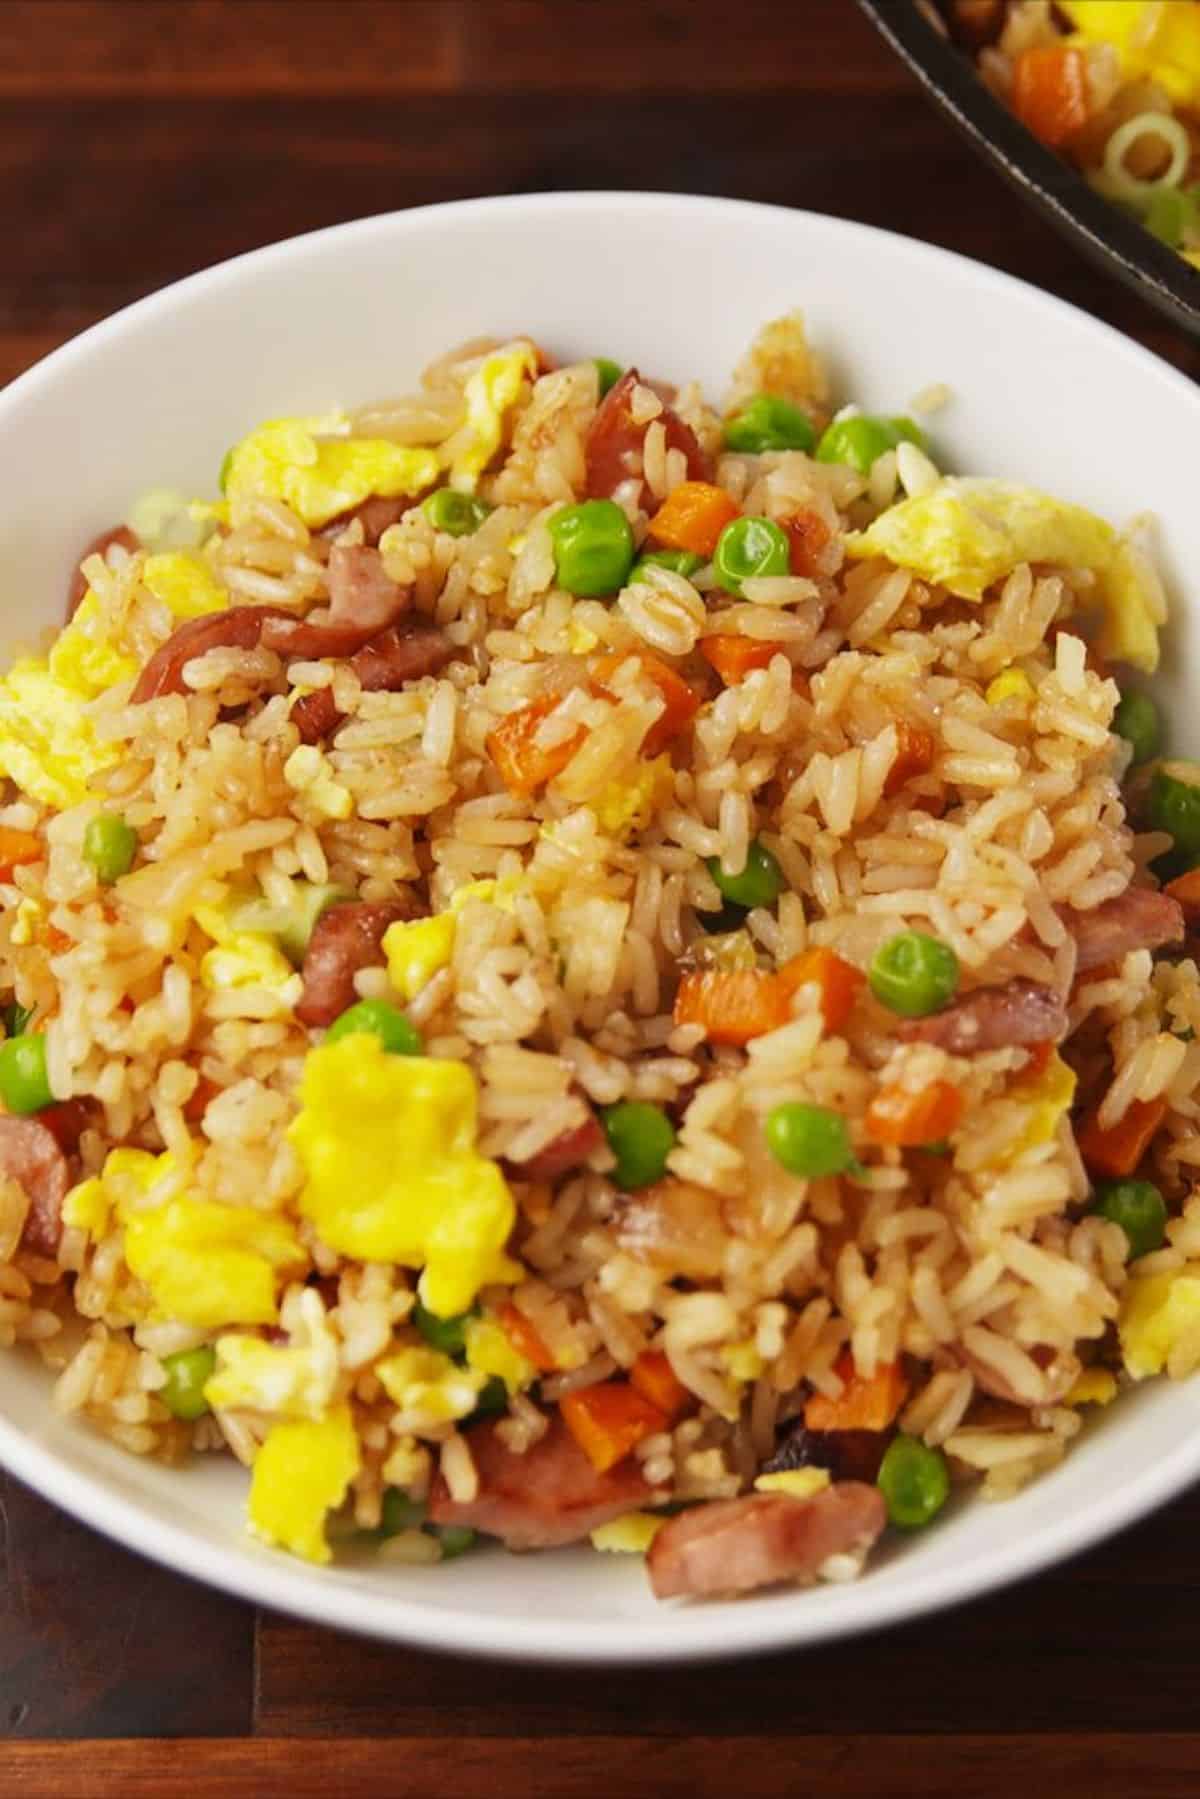 Healthy hot dog fried rice in a white bowl.